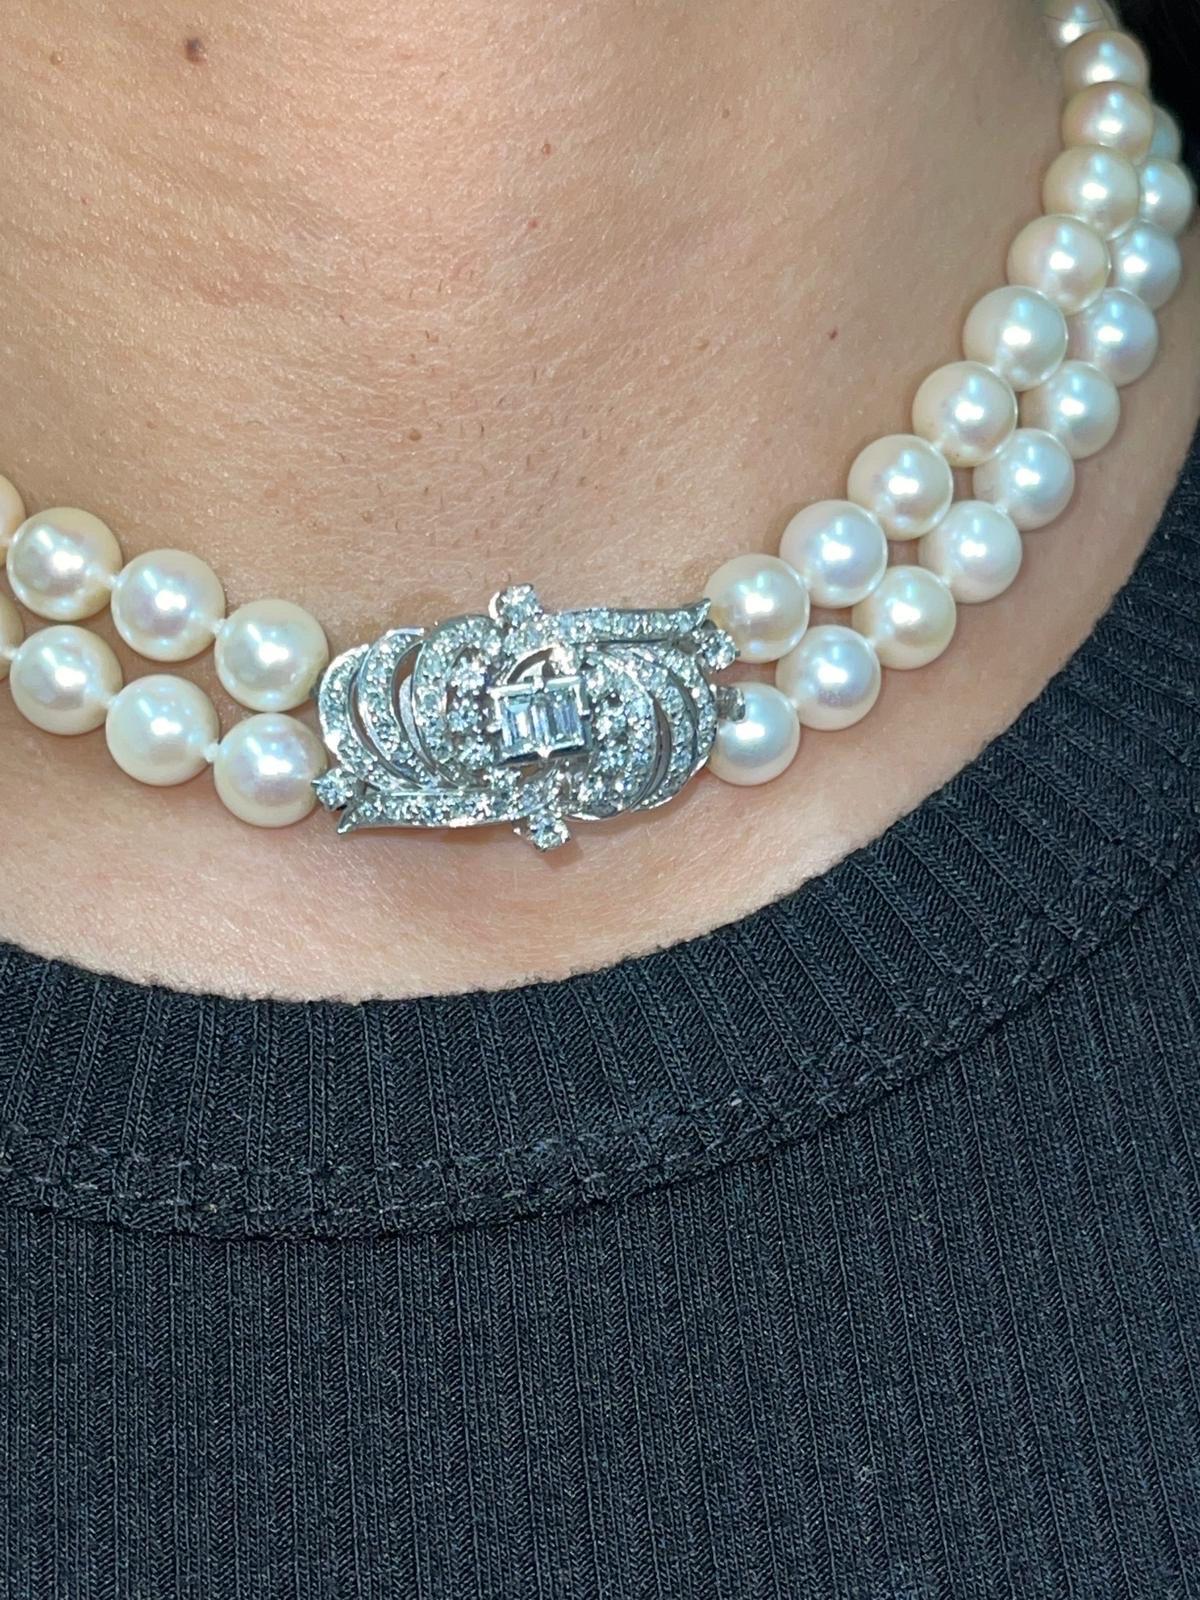 Antique 5.00 Carat Diamonds and Pearls Choker Necklace 18k White Gold For Sale 4